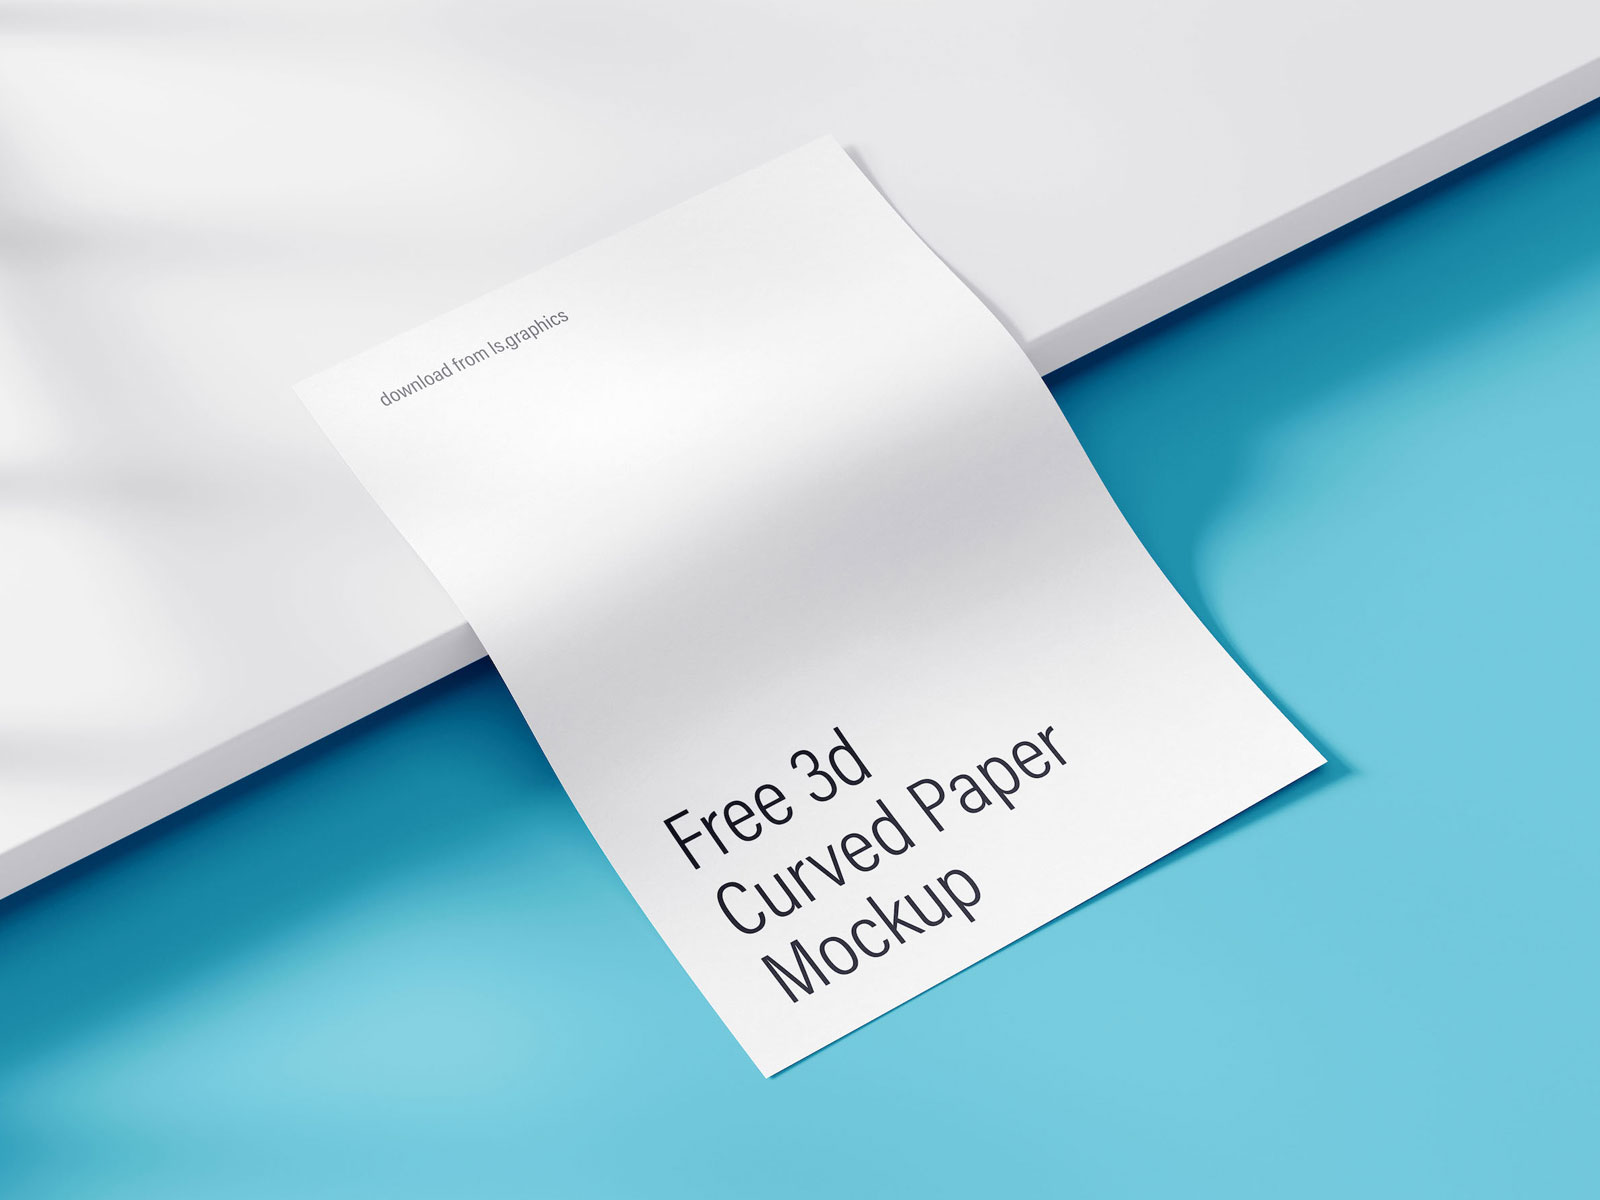 3D Curved Paper PSD Mockup